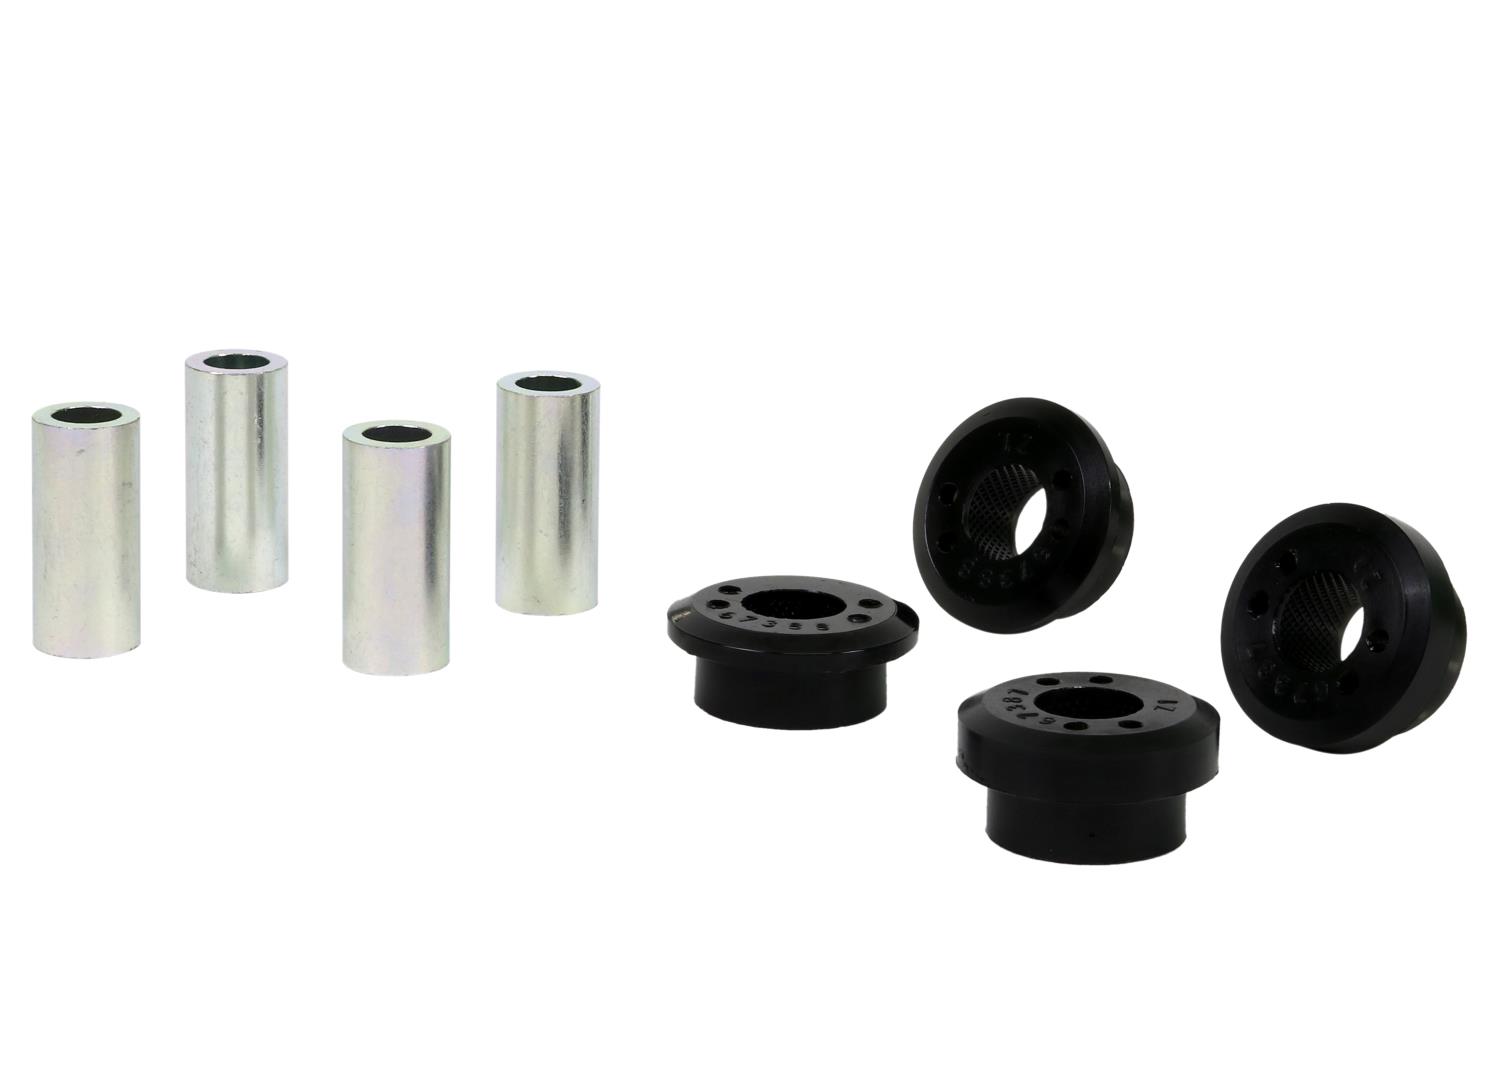 W63394 Rear Control Arm Lower Rear Outer Bushing Kit for 1999-2009 Subaru Legacy, 1999-2009 Outback